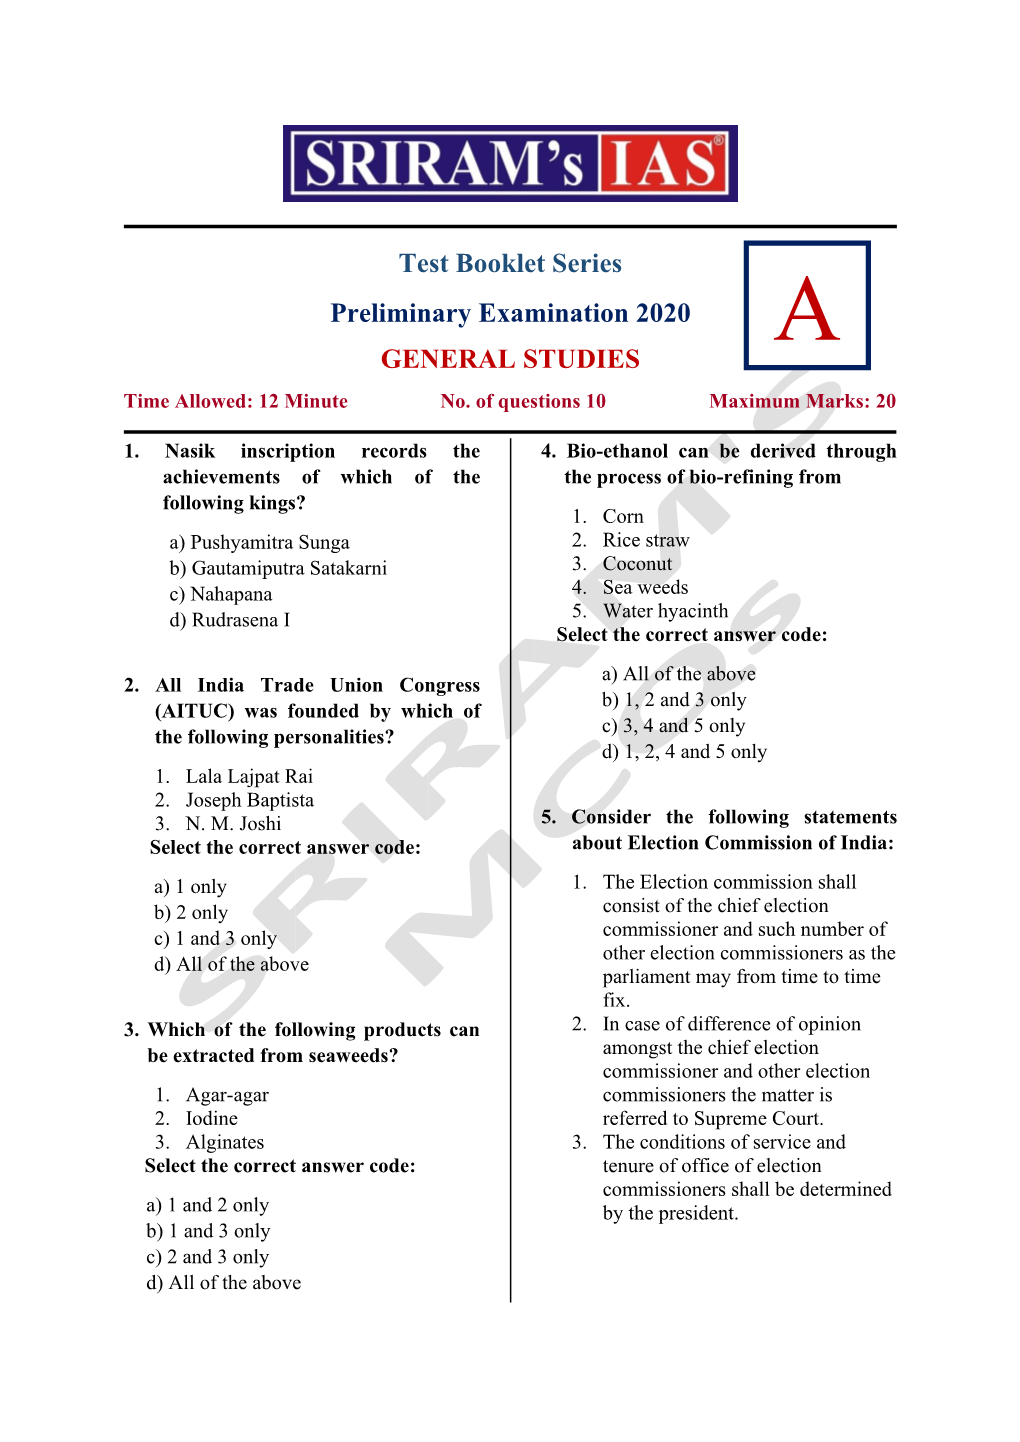 Test Booklet Series Preliminary Examination 2020 GENERAL